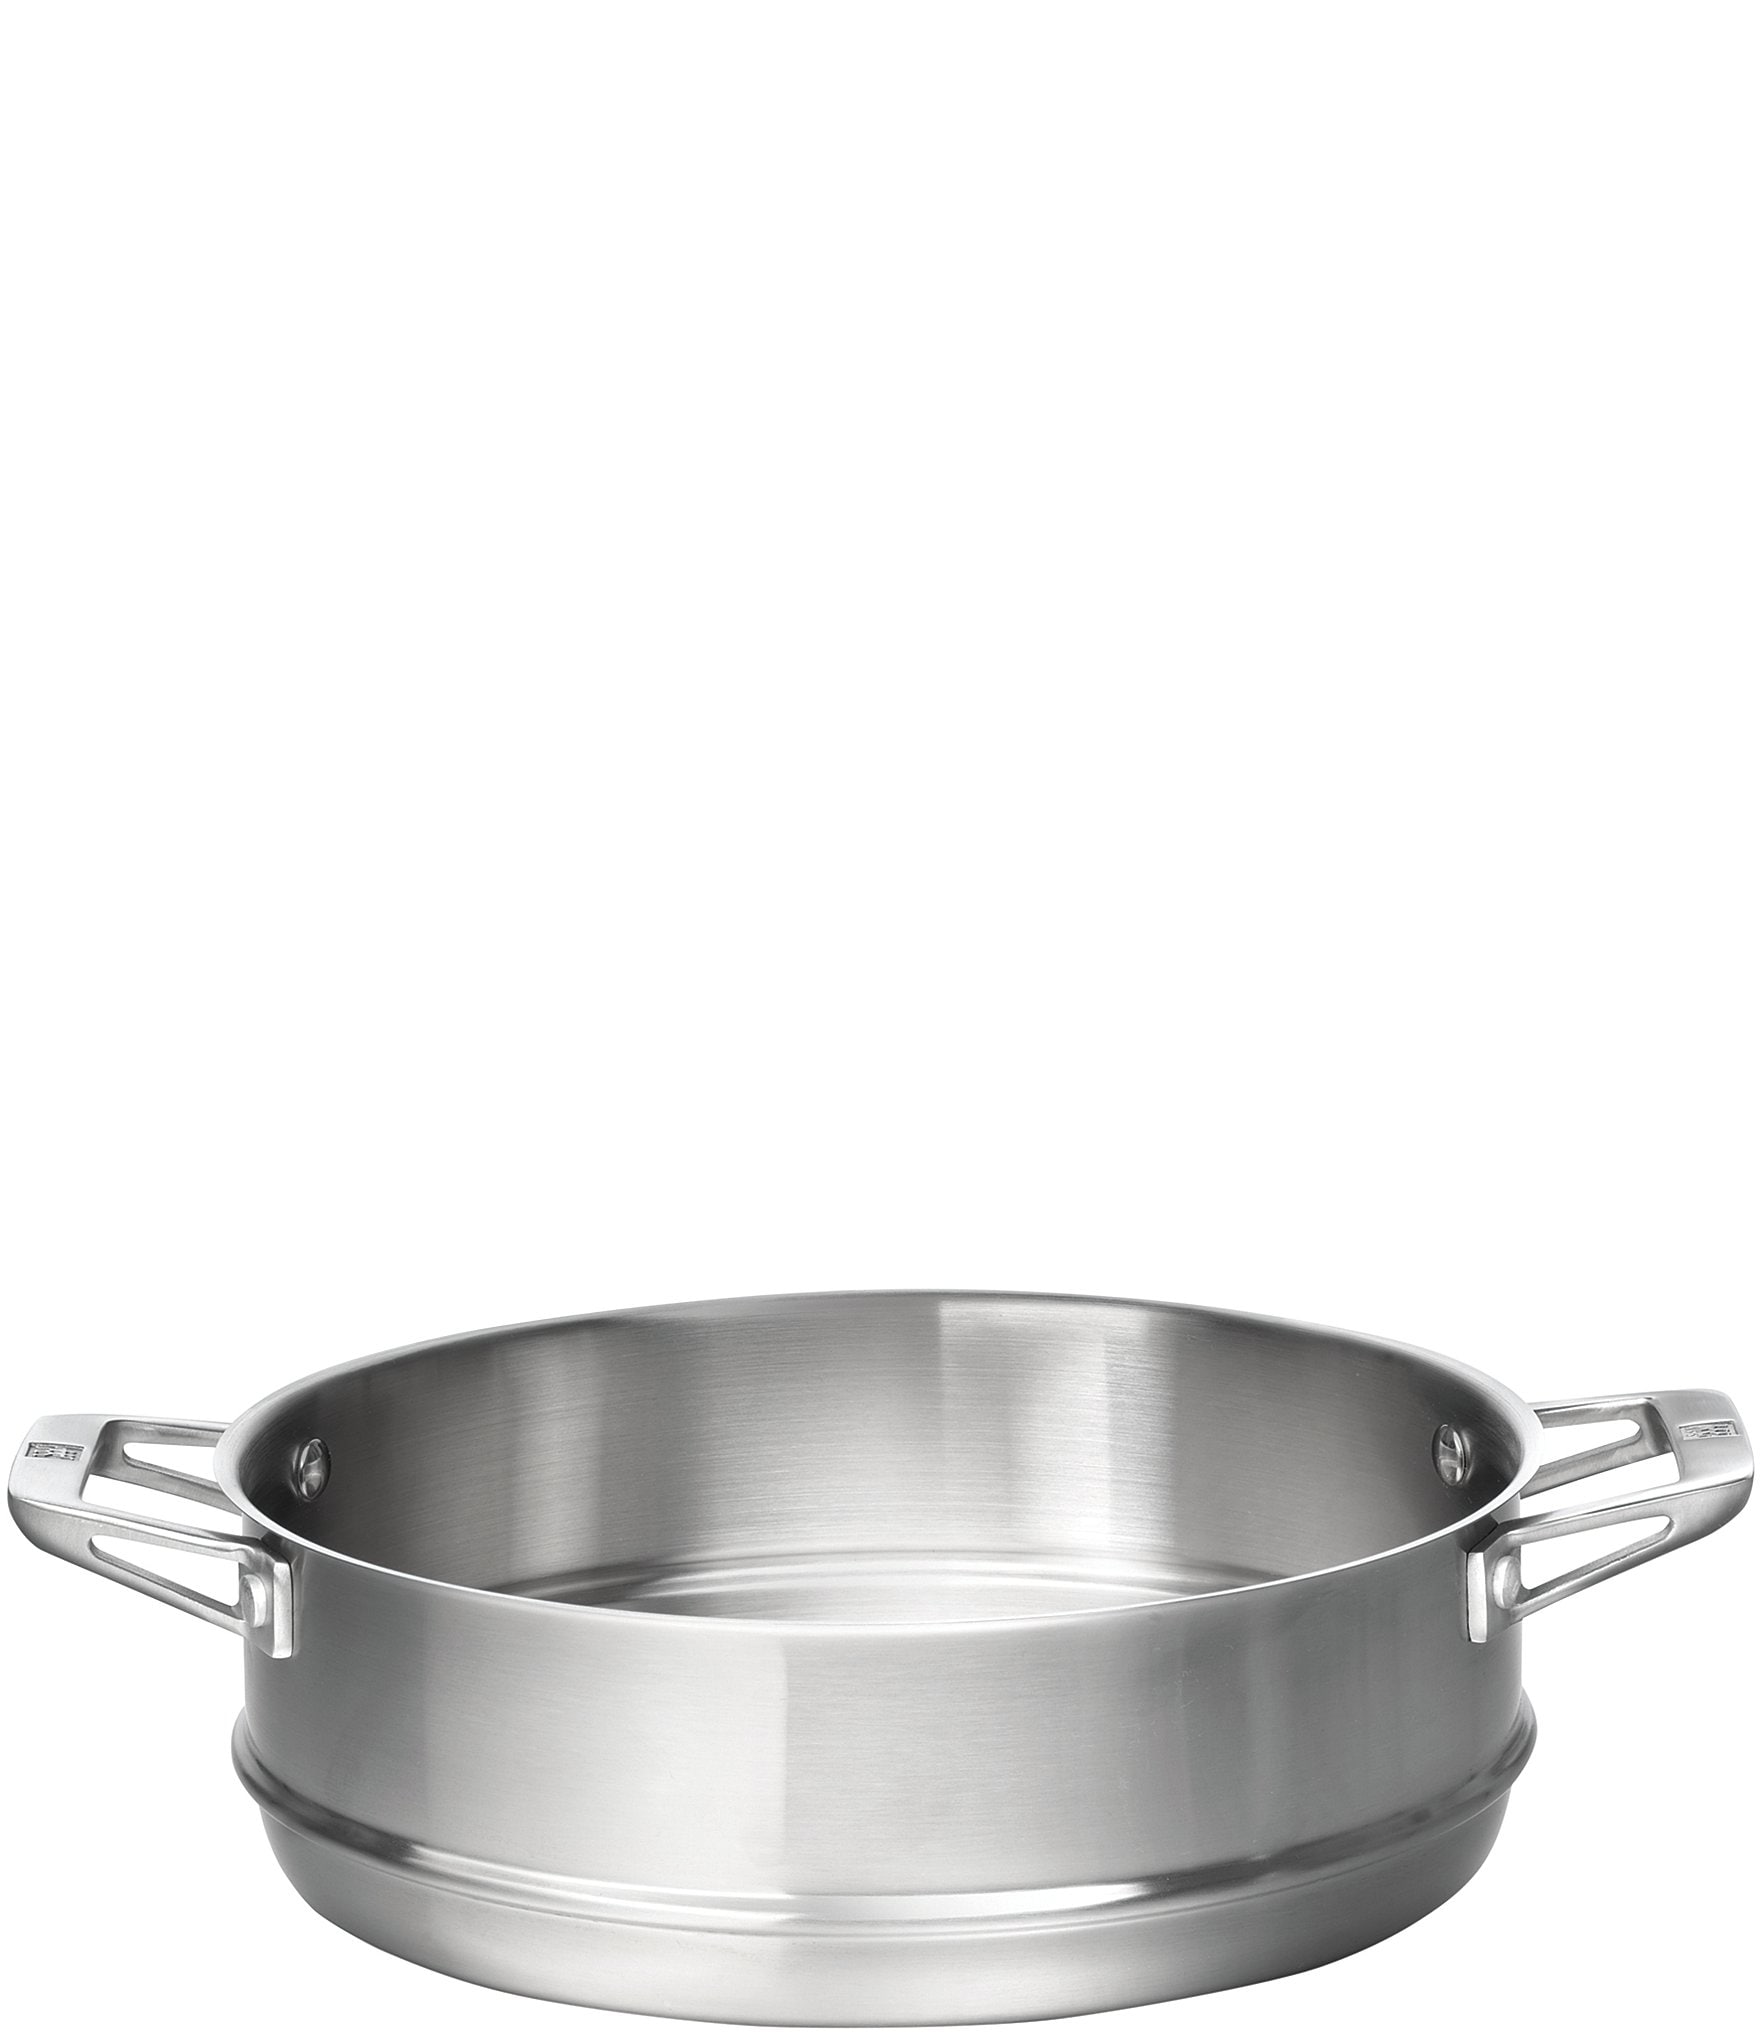 https://dimg.dillards.com/is/image/DillardsZoom/zoom/zwilling-motion-hard-anodized-collection-5-qt-stainless-steel-steamer-insert/20100277_zi.jpg